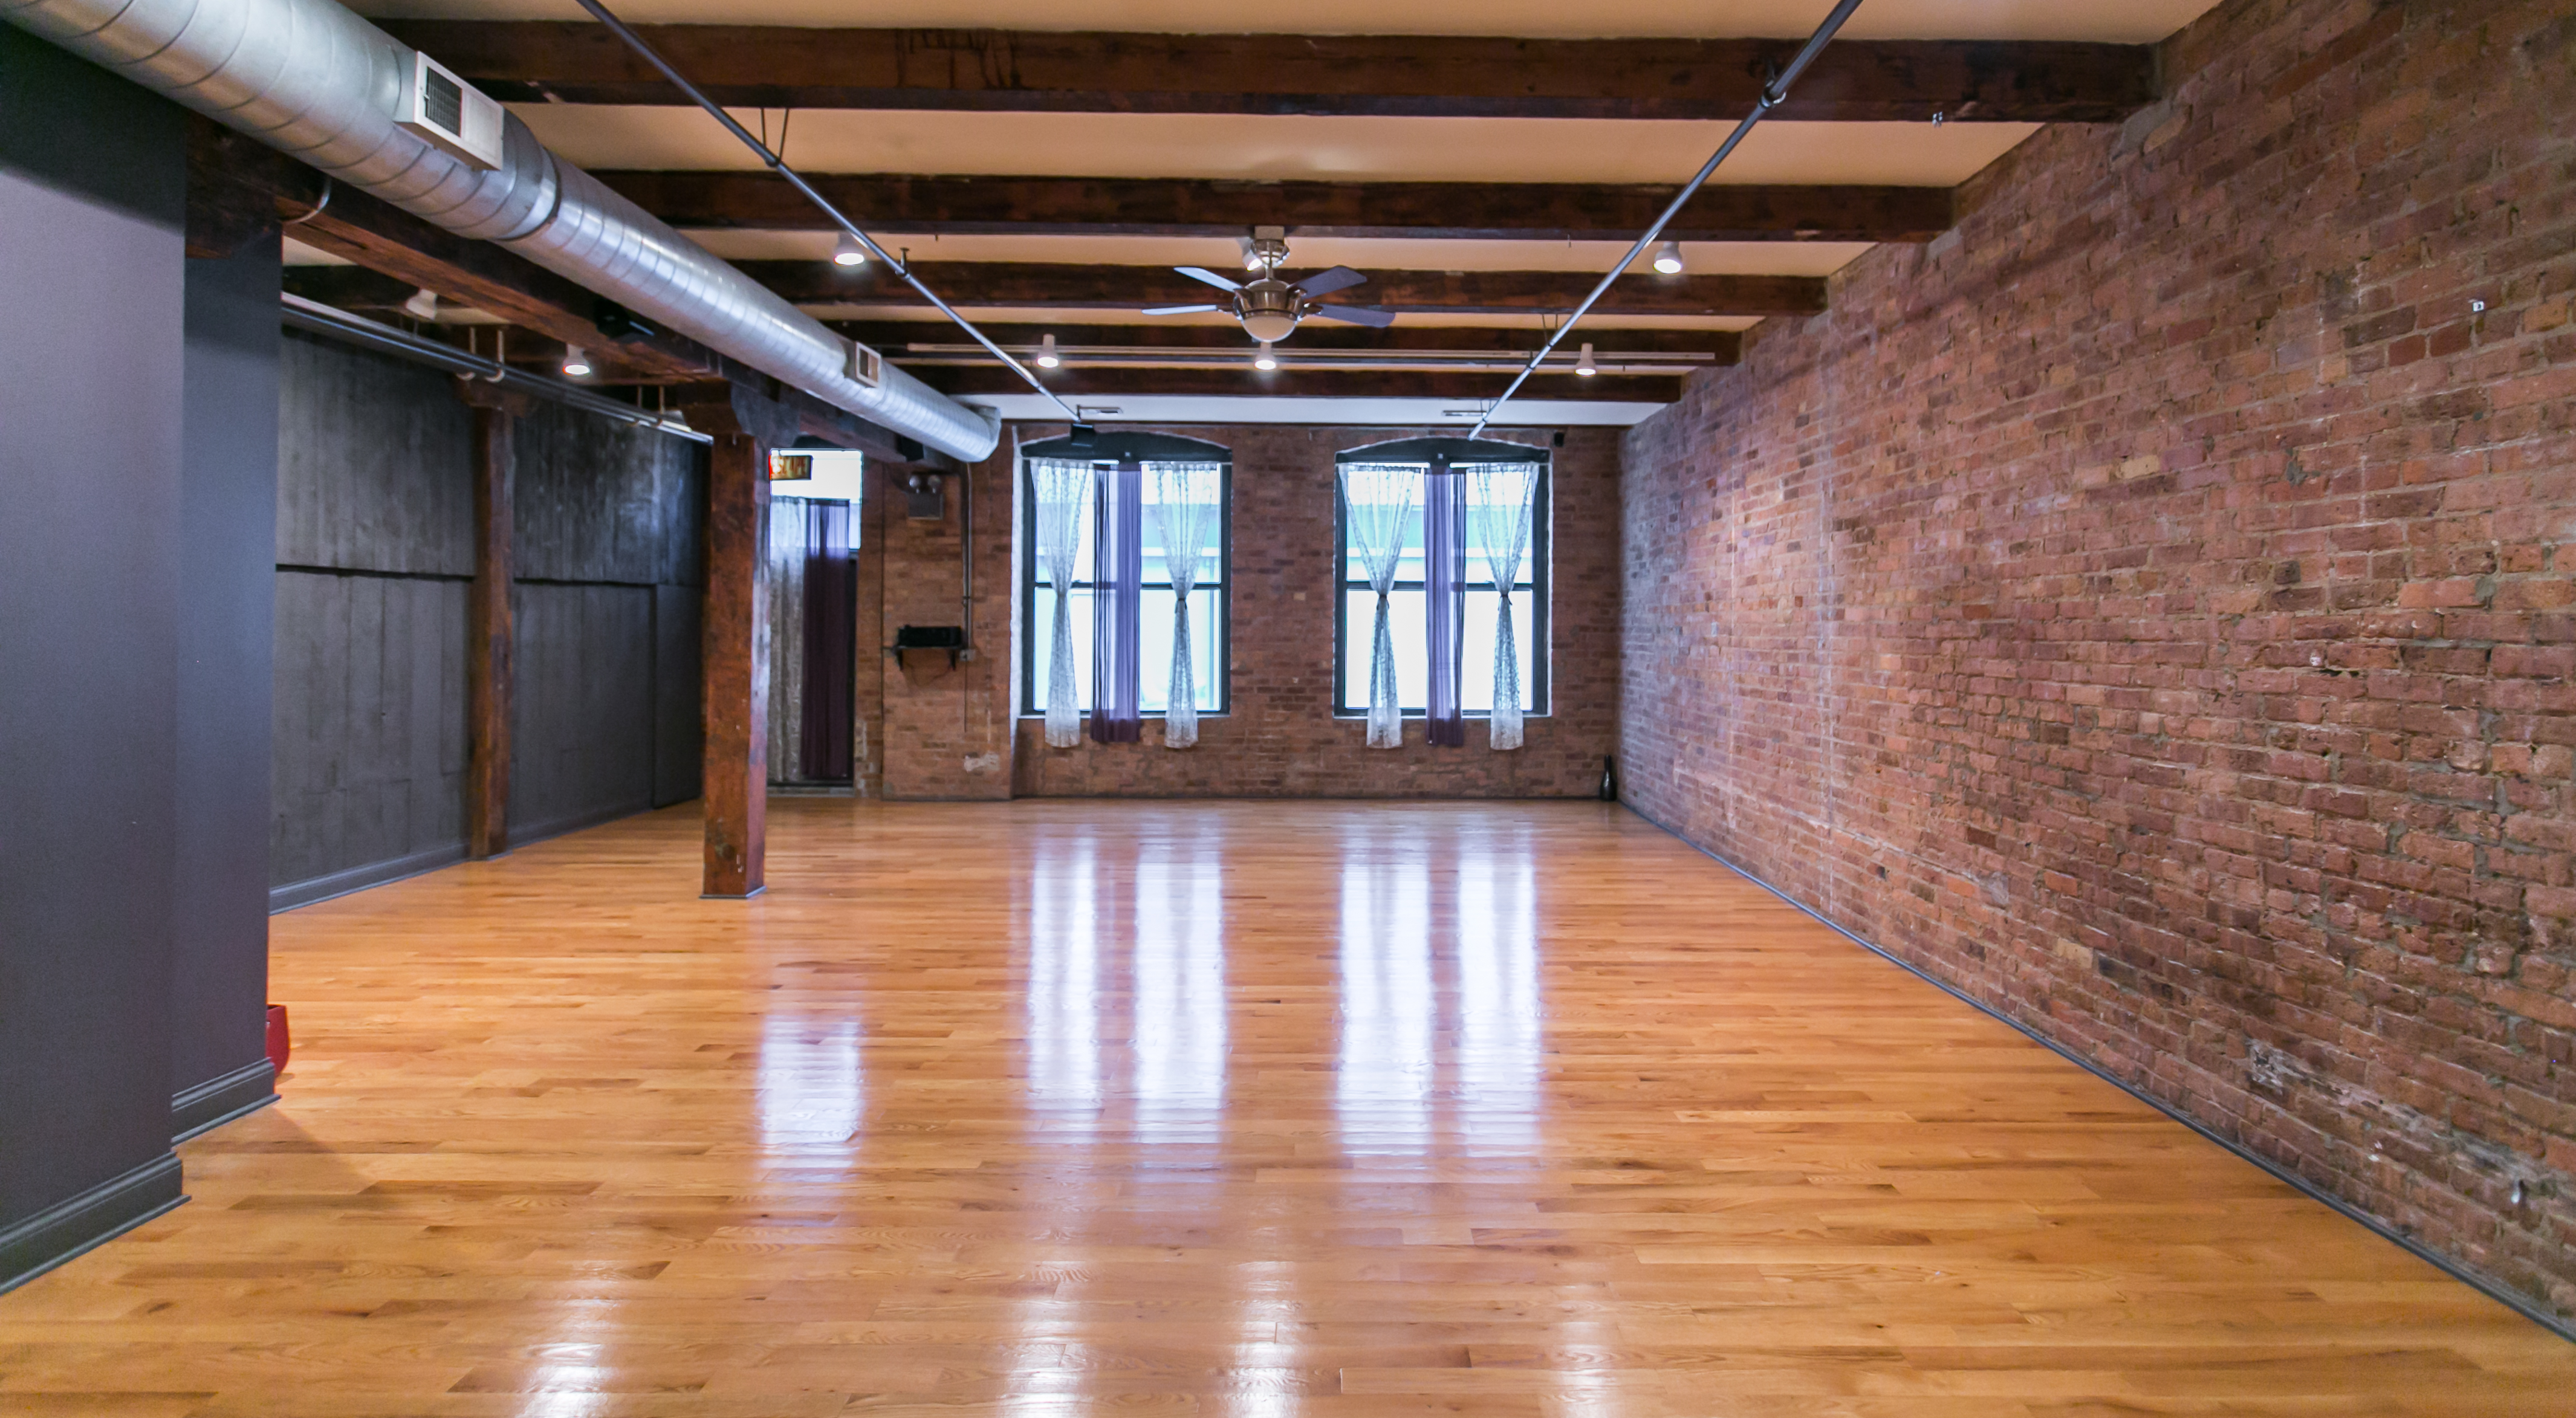 Yoga Loft Studios - Chicago: Read Reviews and Book Classes on